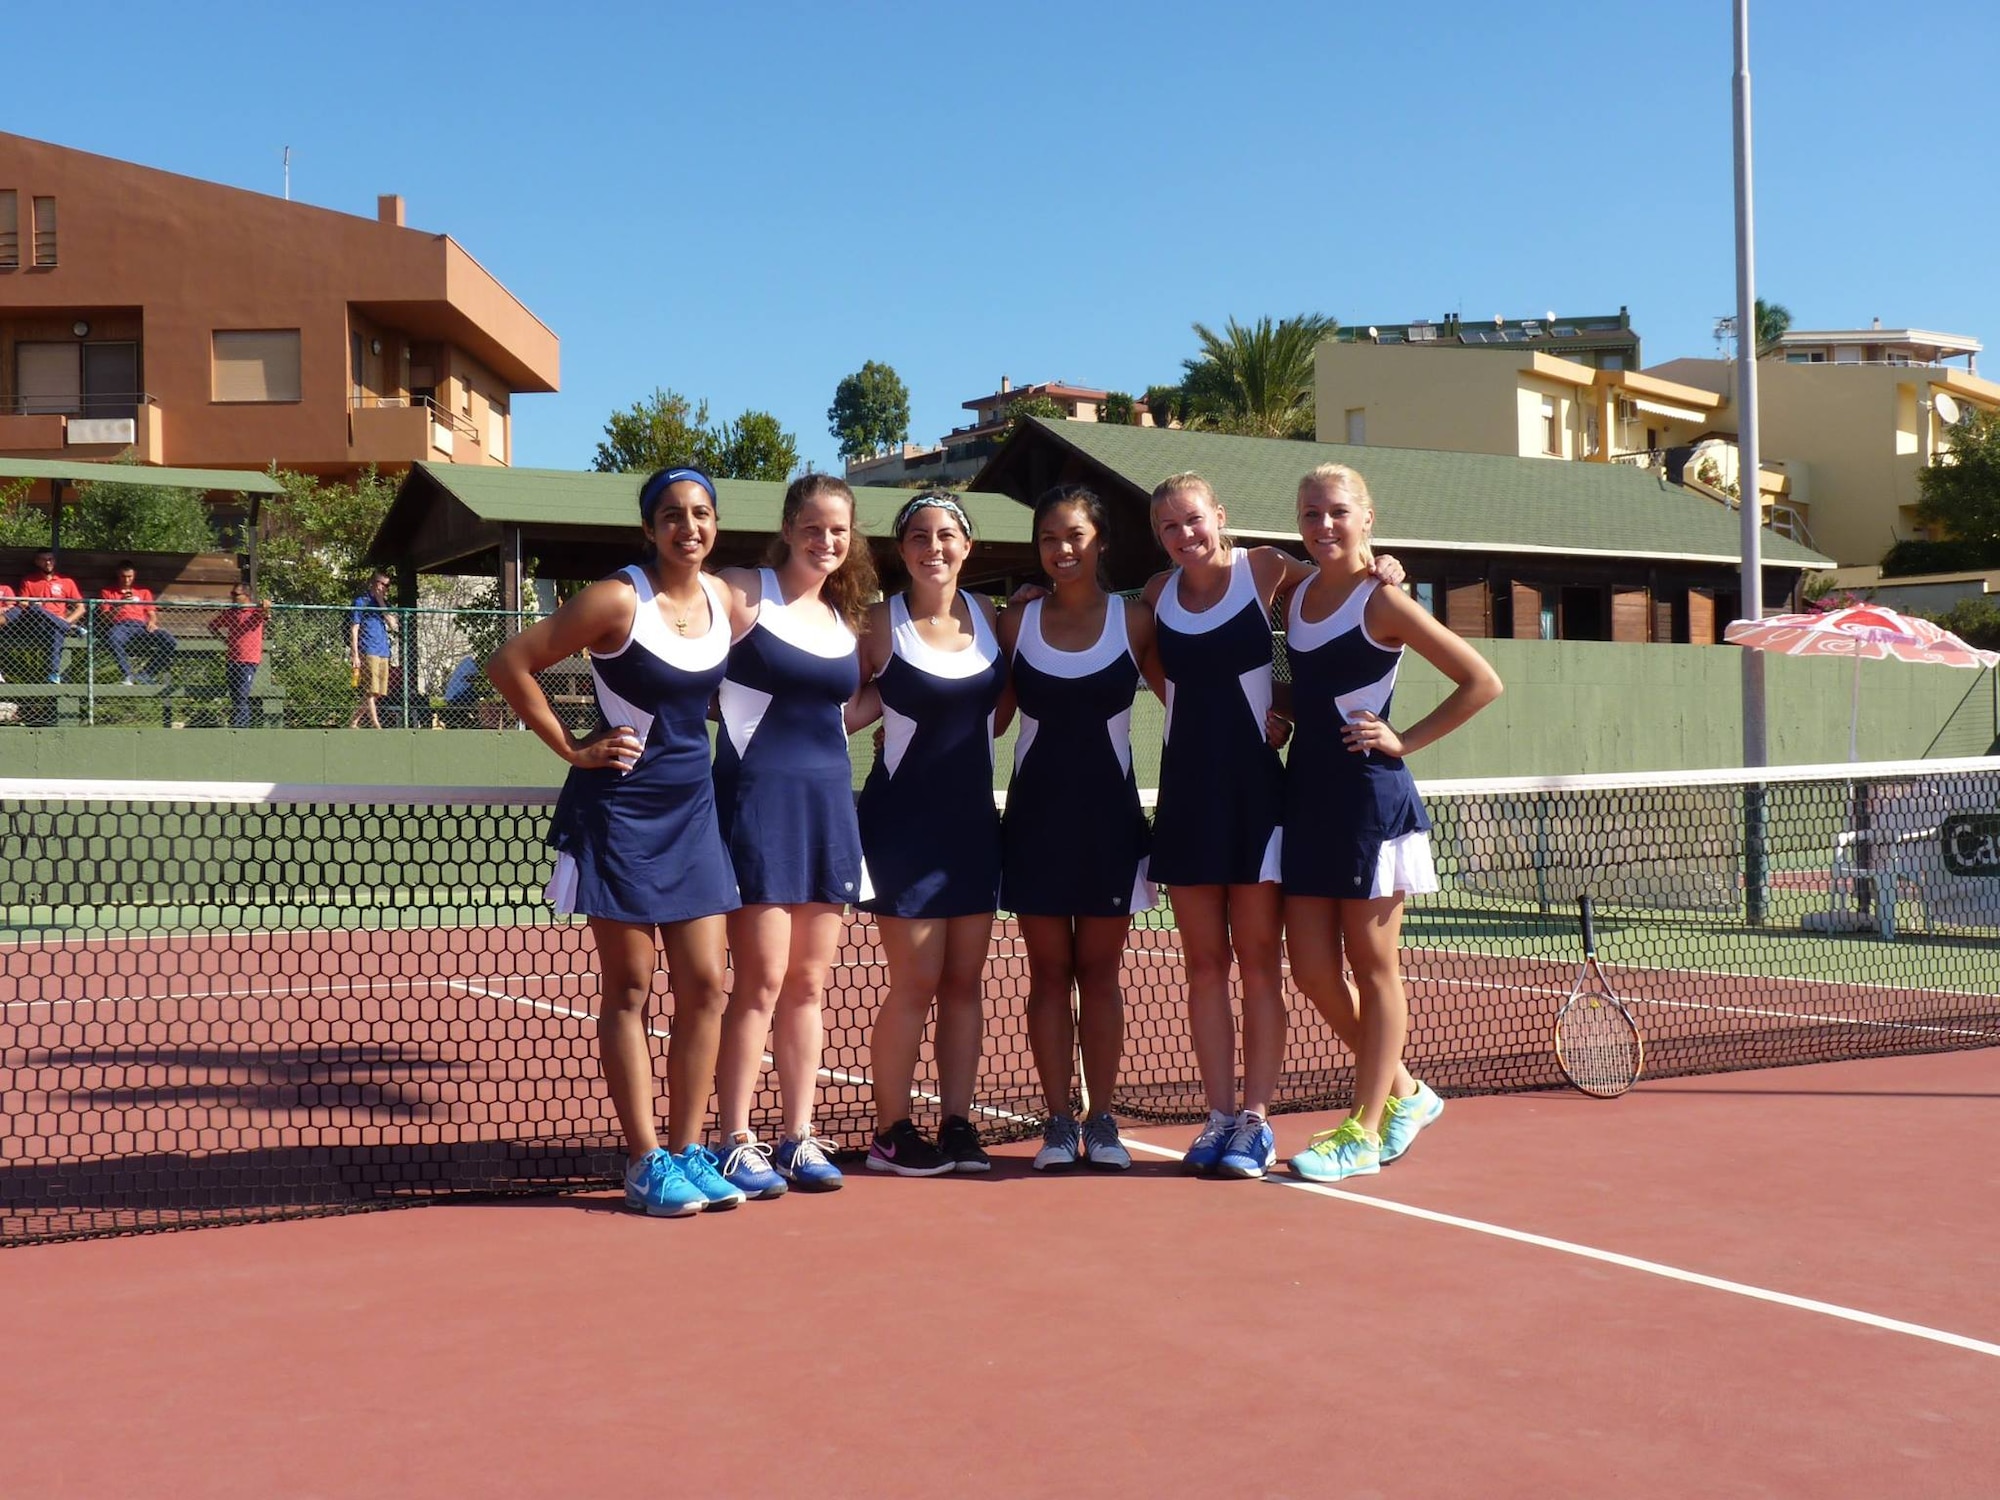 The U.S. Air Force Falcons pose for a group photo during the Headquarters Air Command Tennis Championship 2016 Sardegna in Cagliari, Italy Sept. 28. The Falcons were undefeated throughout the competition. (Courtesy photo)